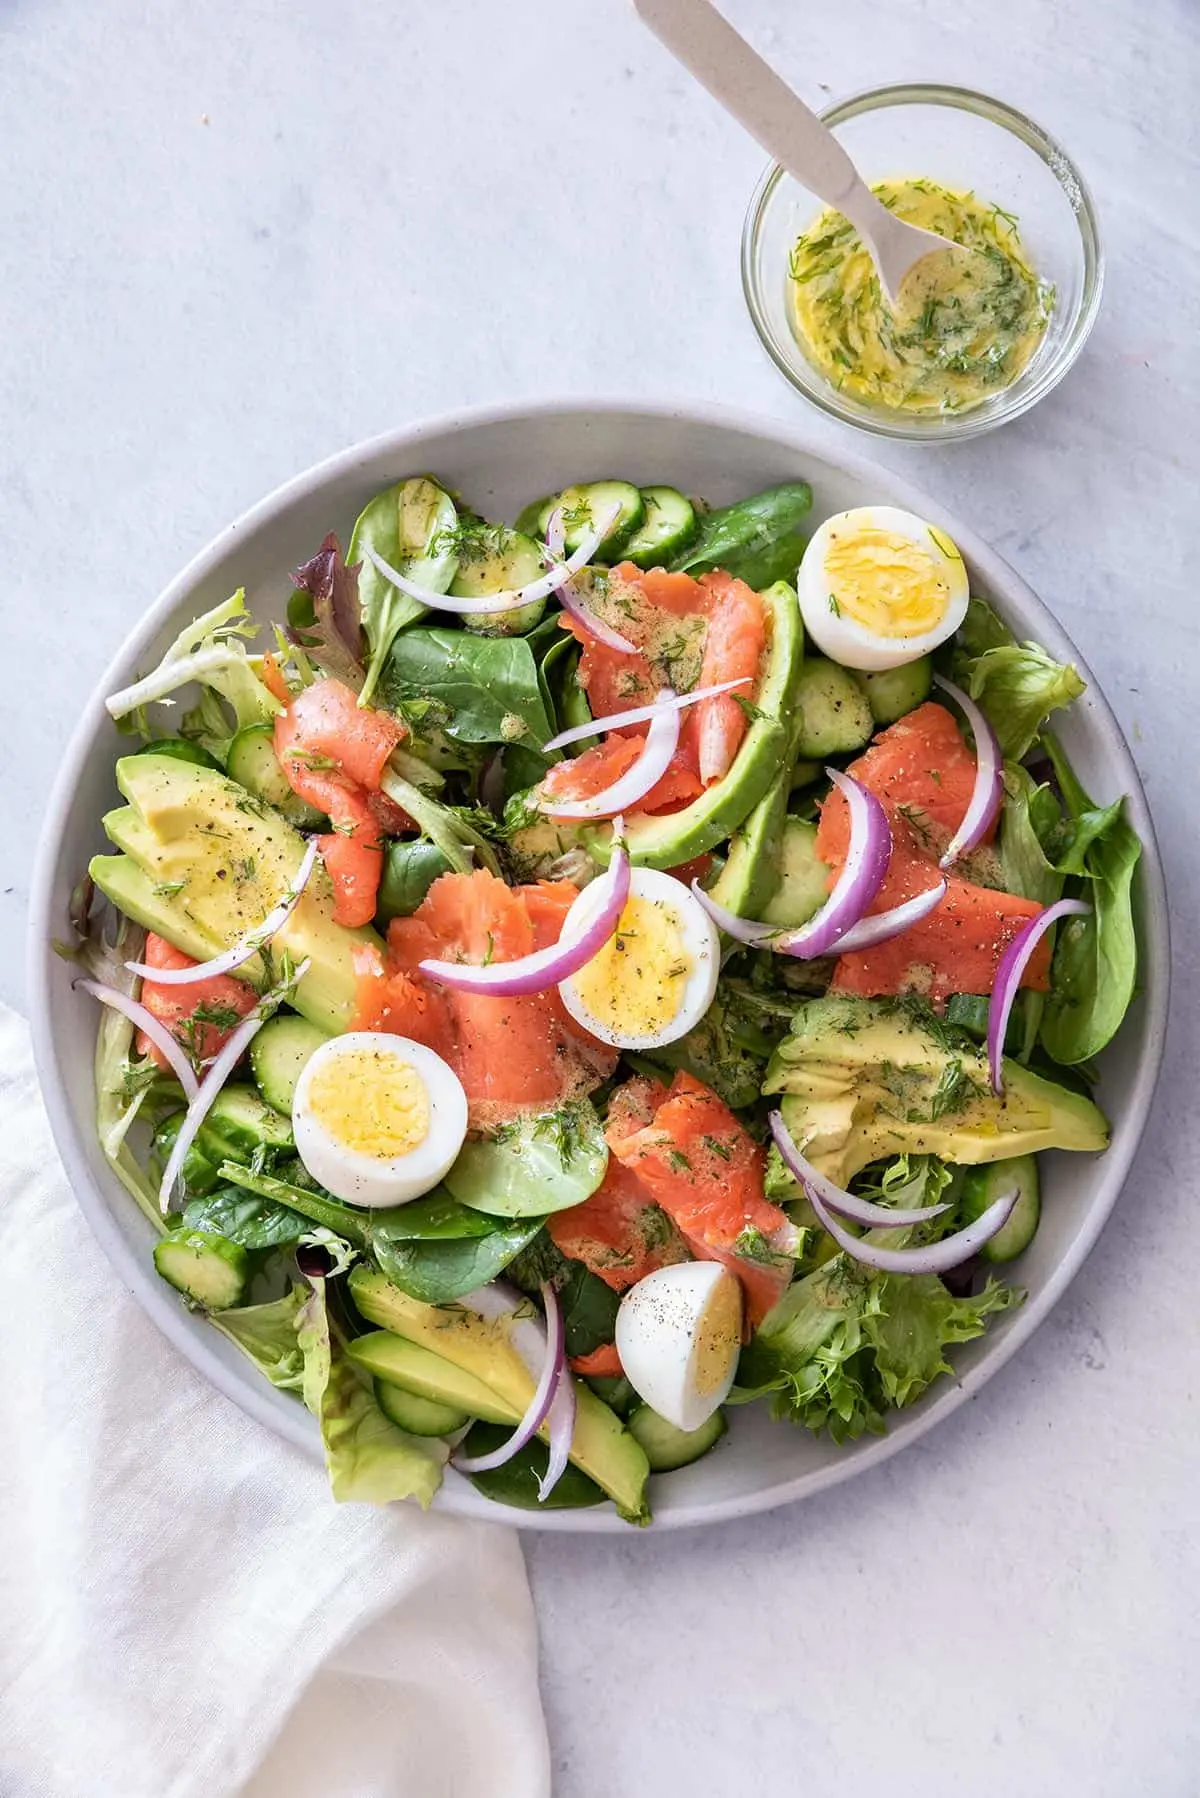 smoked salmon salad calories - How many calories are in a salmon salad